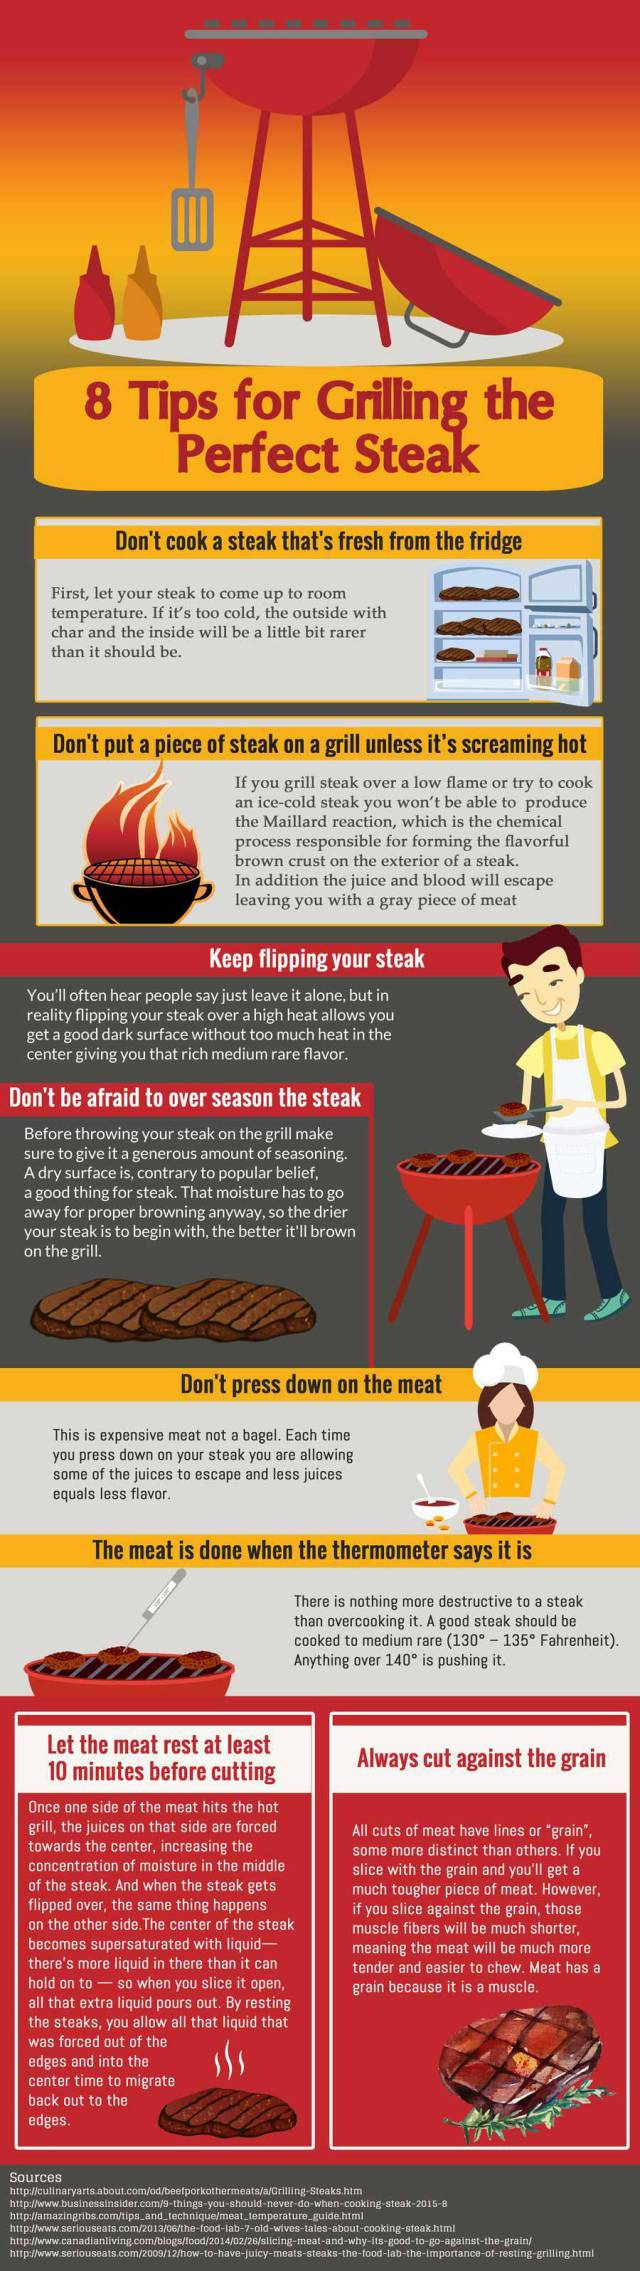 How To Grill The Perfect Steak (infographic)